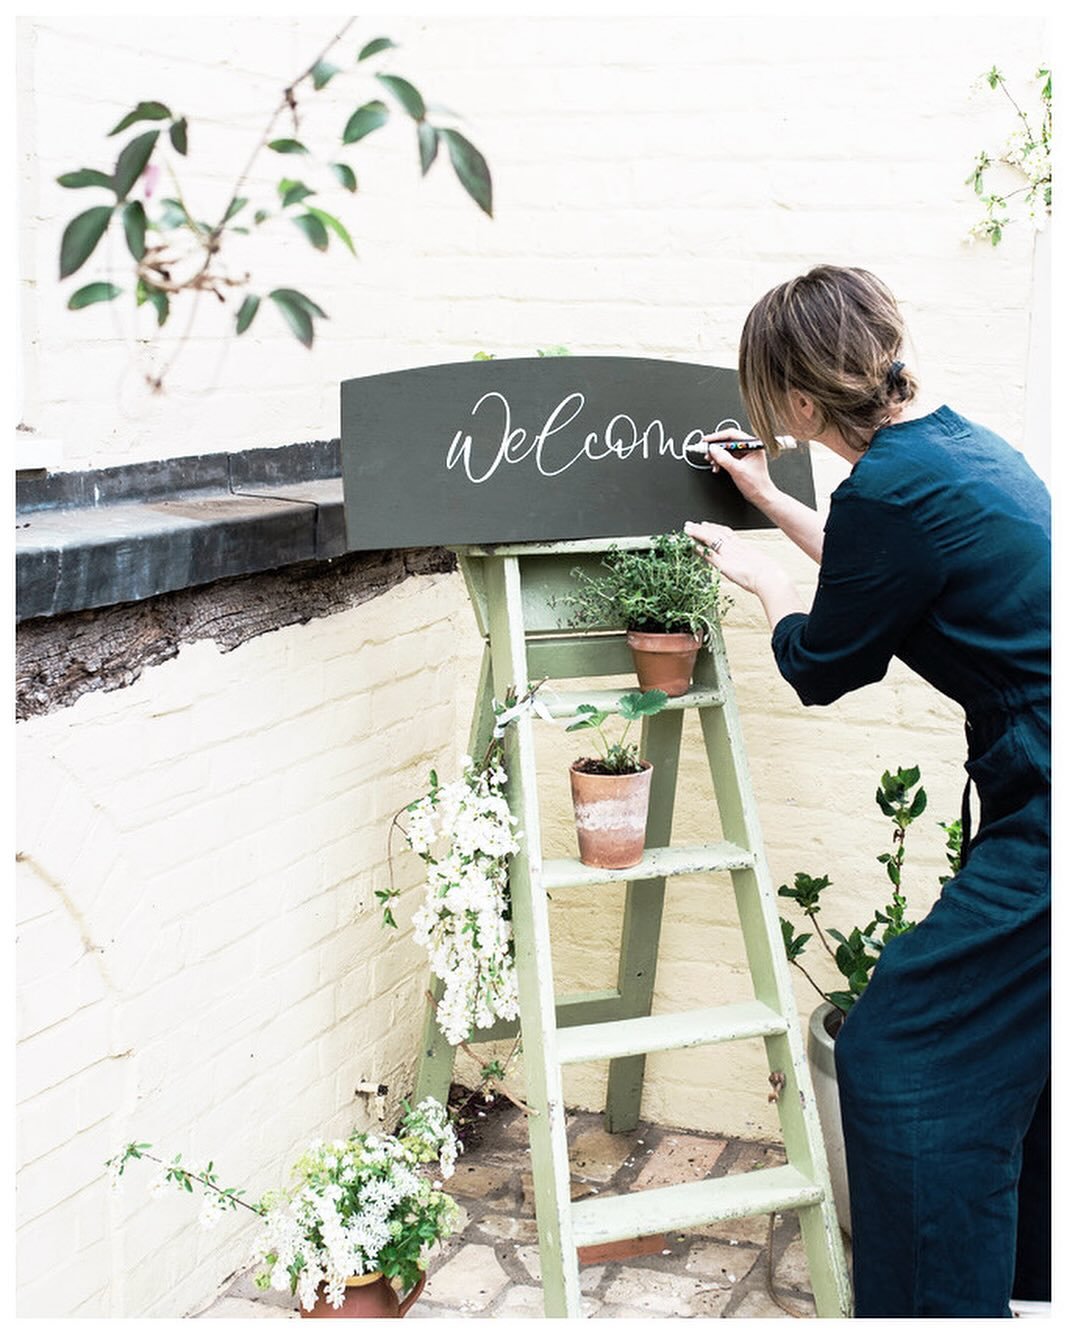 🌿Thursday 9th May - Modern Calligraphy &amp; Party Singage Workshop at @vanil_ltd in Woodbridge. 🌿Delighted to be teaming up with the lovely Mandy for back to back workshops covering two very different skills. The morning session 10am -12pm will be